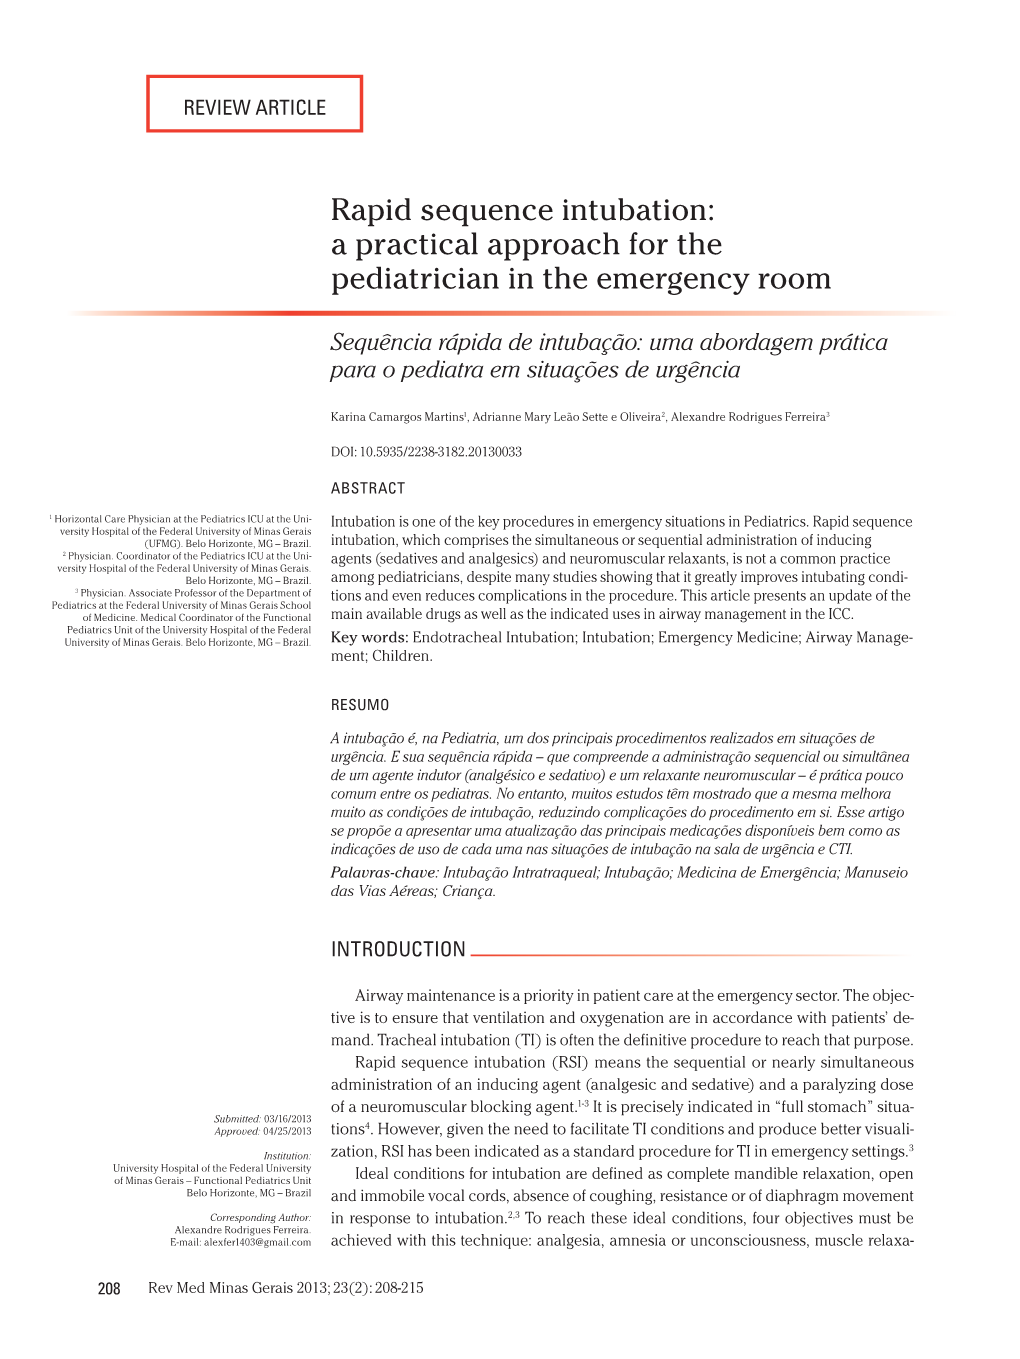 Rapid Sequence Intubation: a Practical Approach for the Pediatrician in the Emergency Room